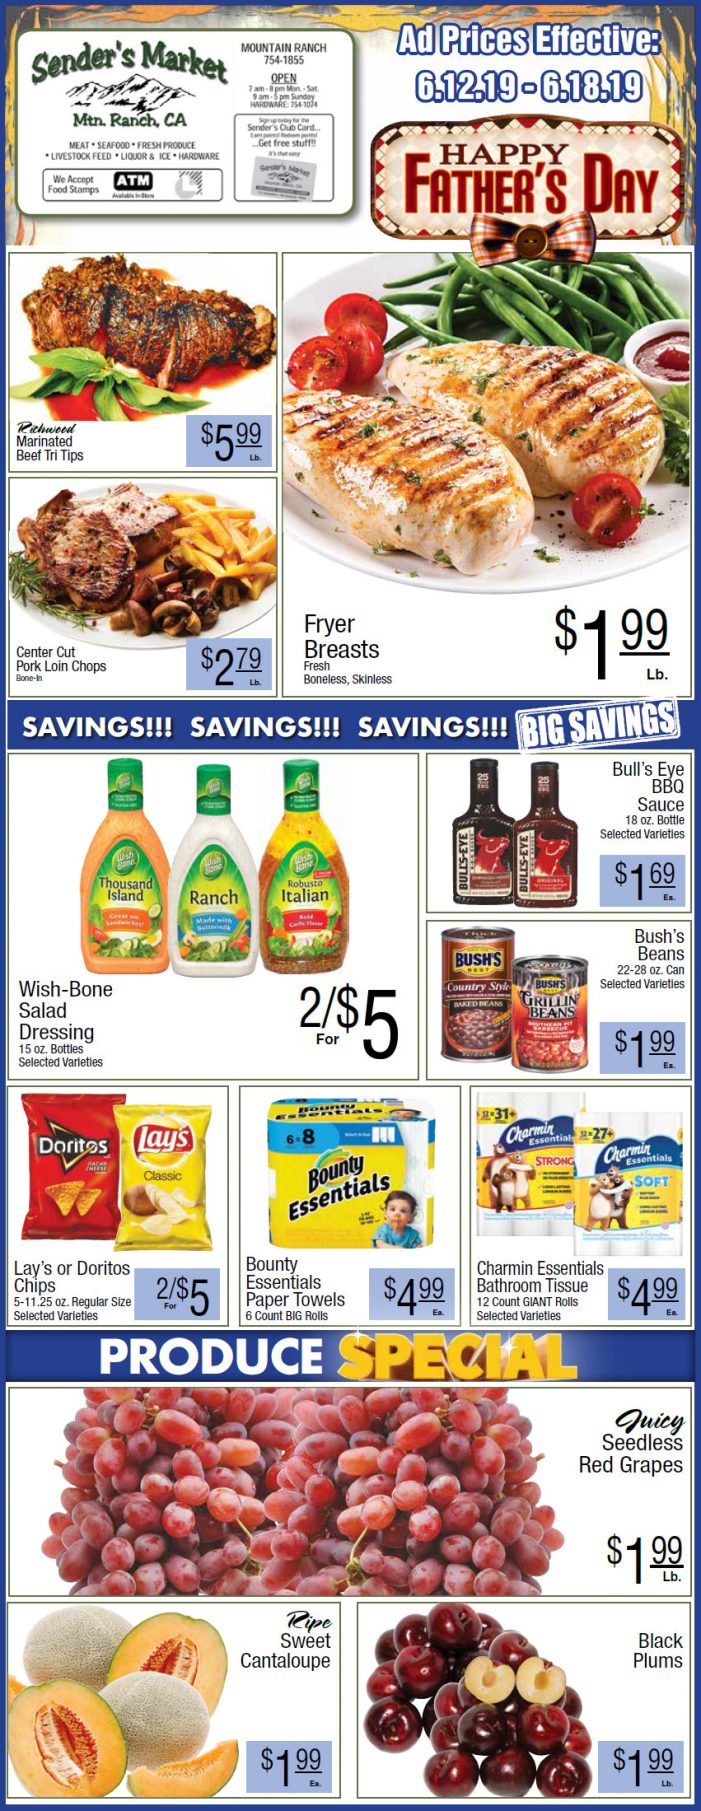 Sender’s Market Weekly Ad & Grocery Specials Through June 18th